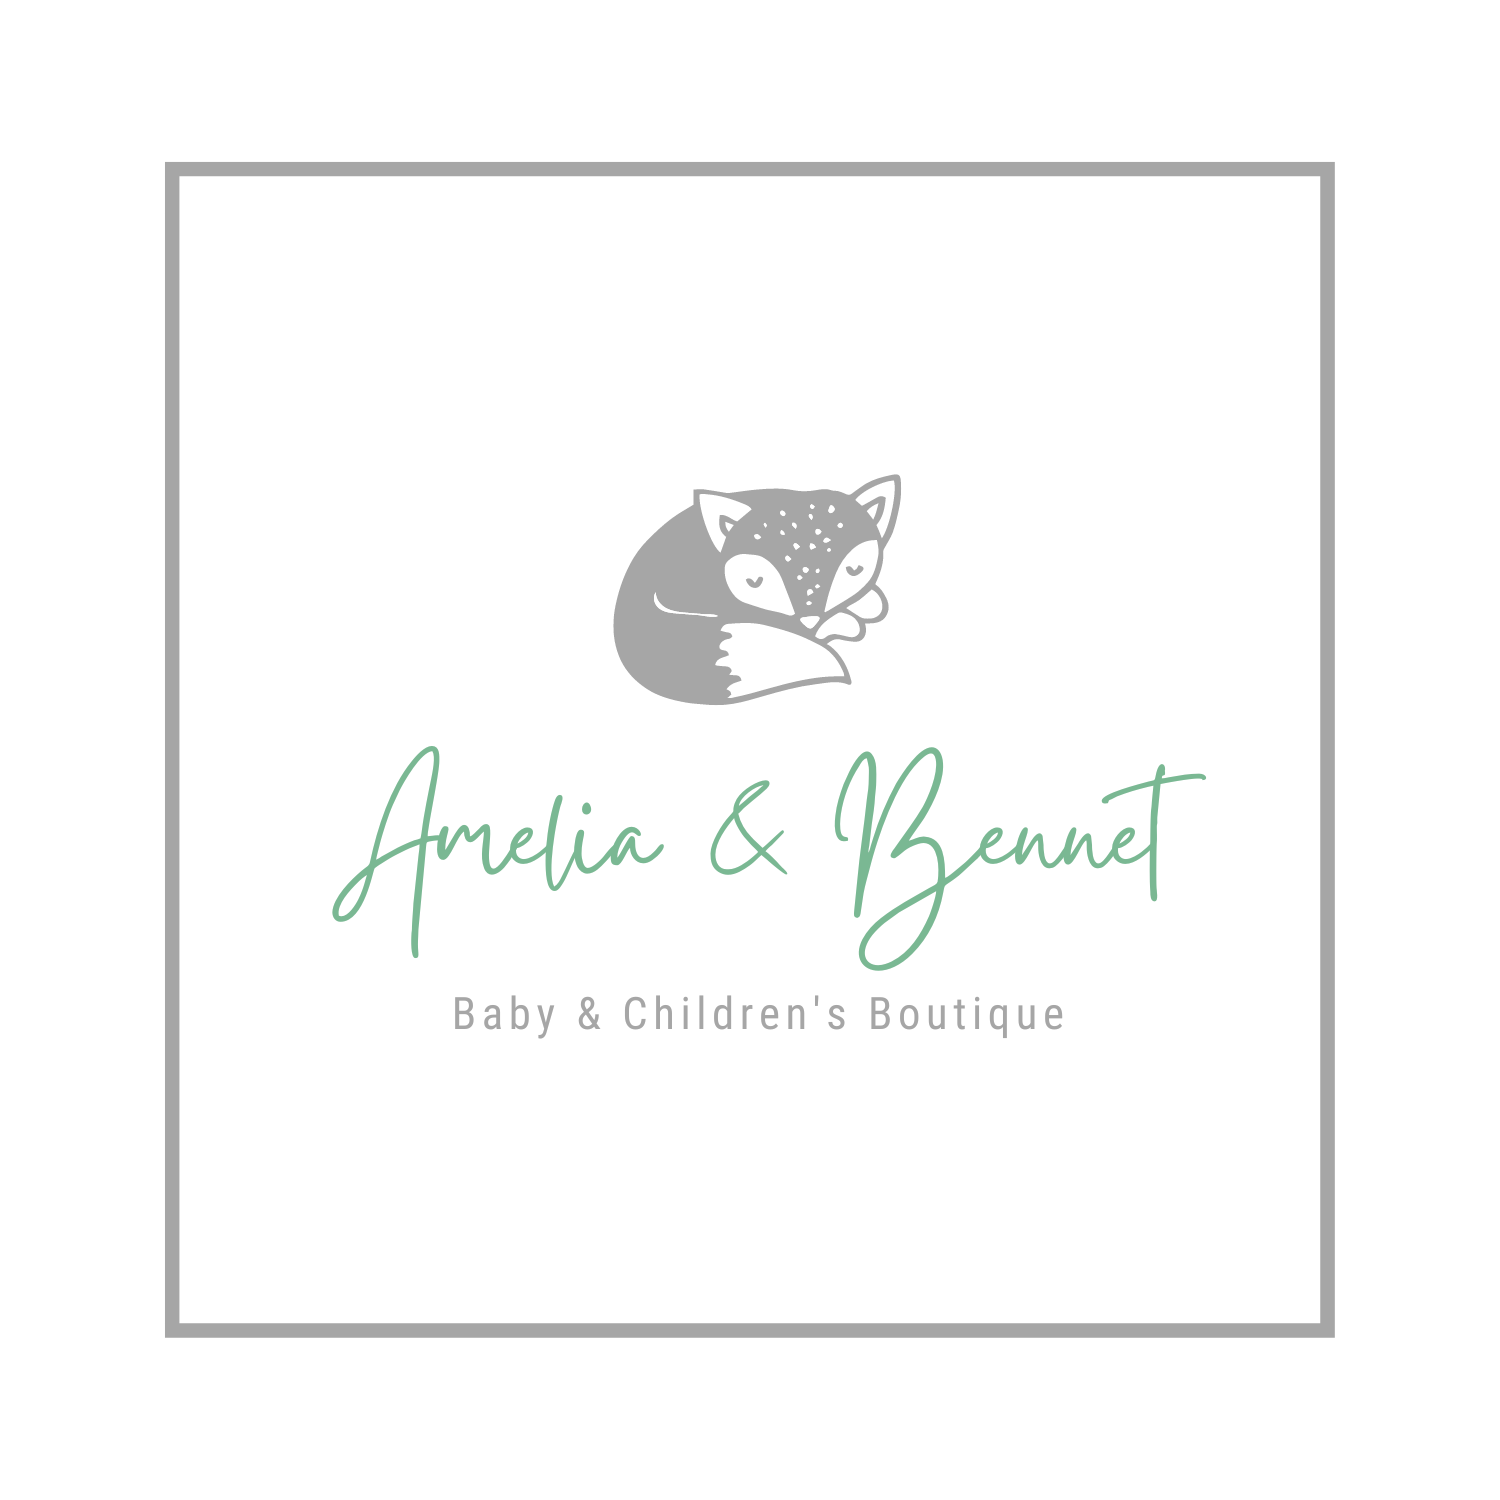 Fashionable Outfits and Accessories for Infants, Toddlers and Pre-Teens with a Cause